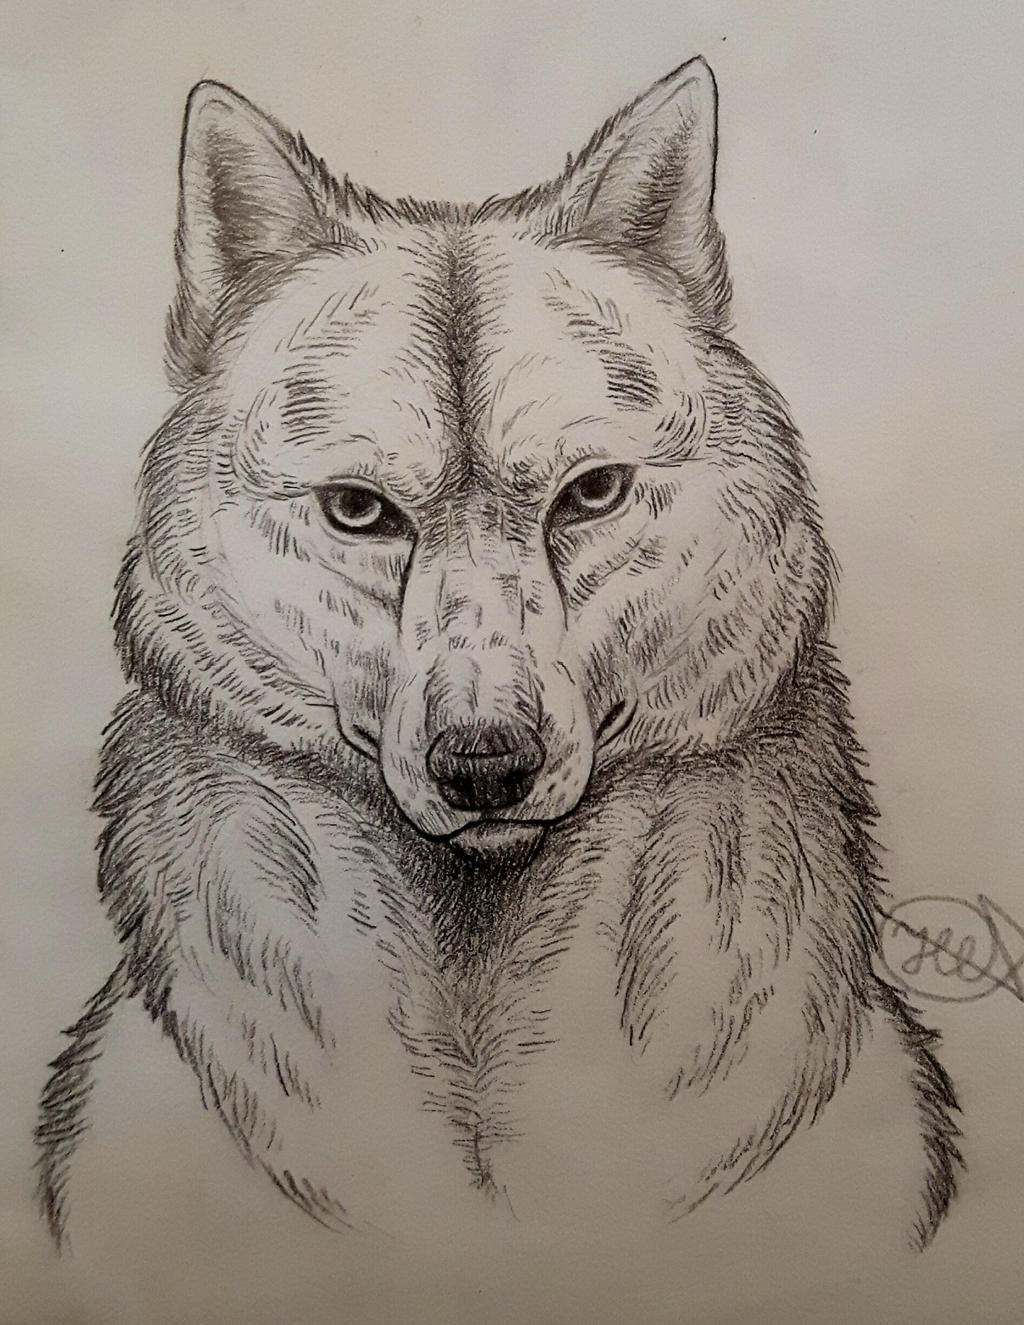 A more realistic wolf sketch